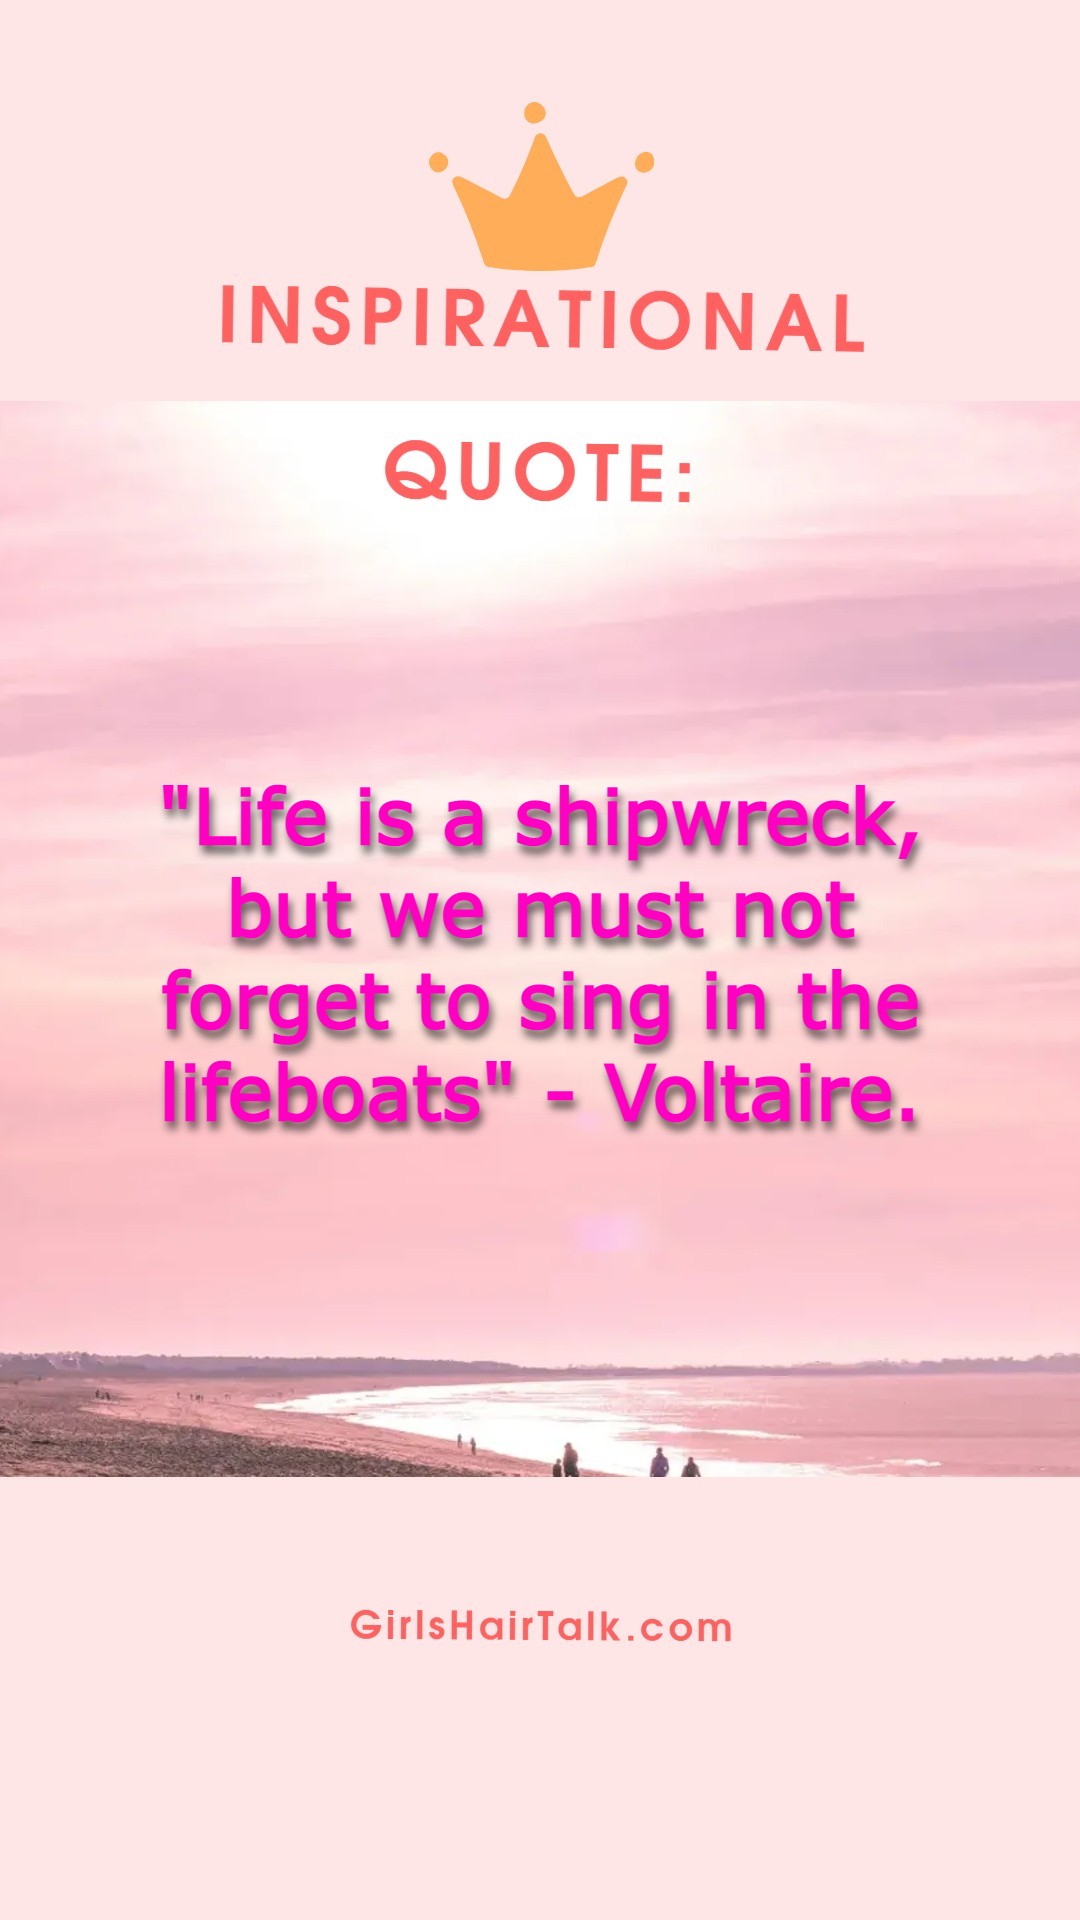 Voltaire cancer quote